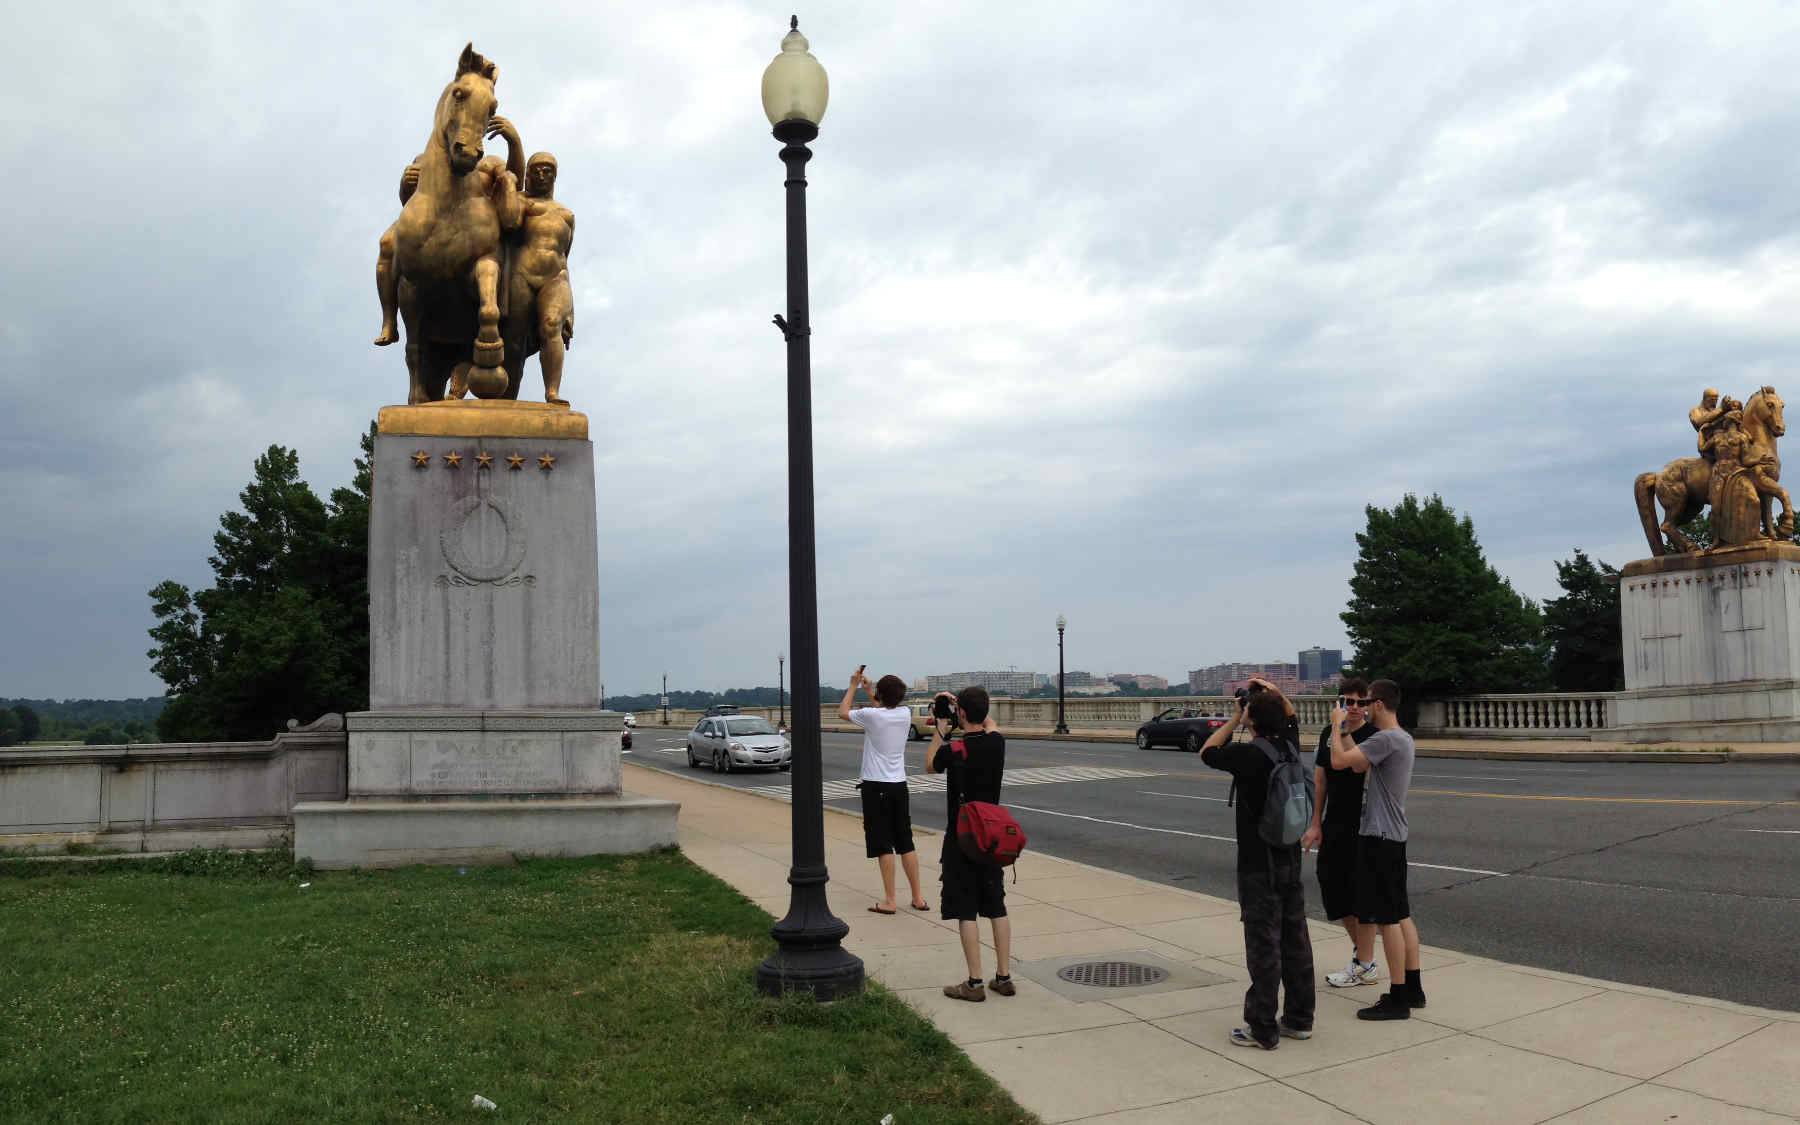 The group taking a photo of a golden statue of a horse